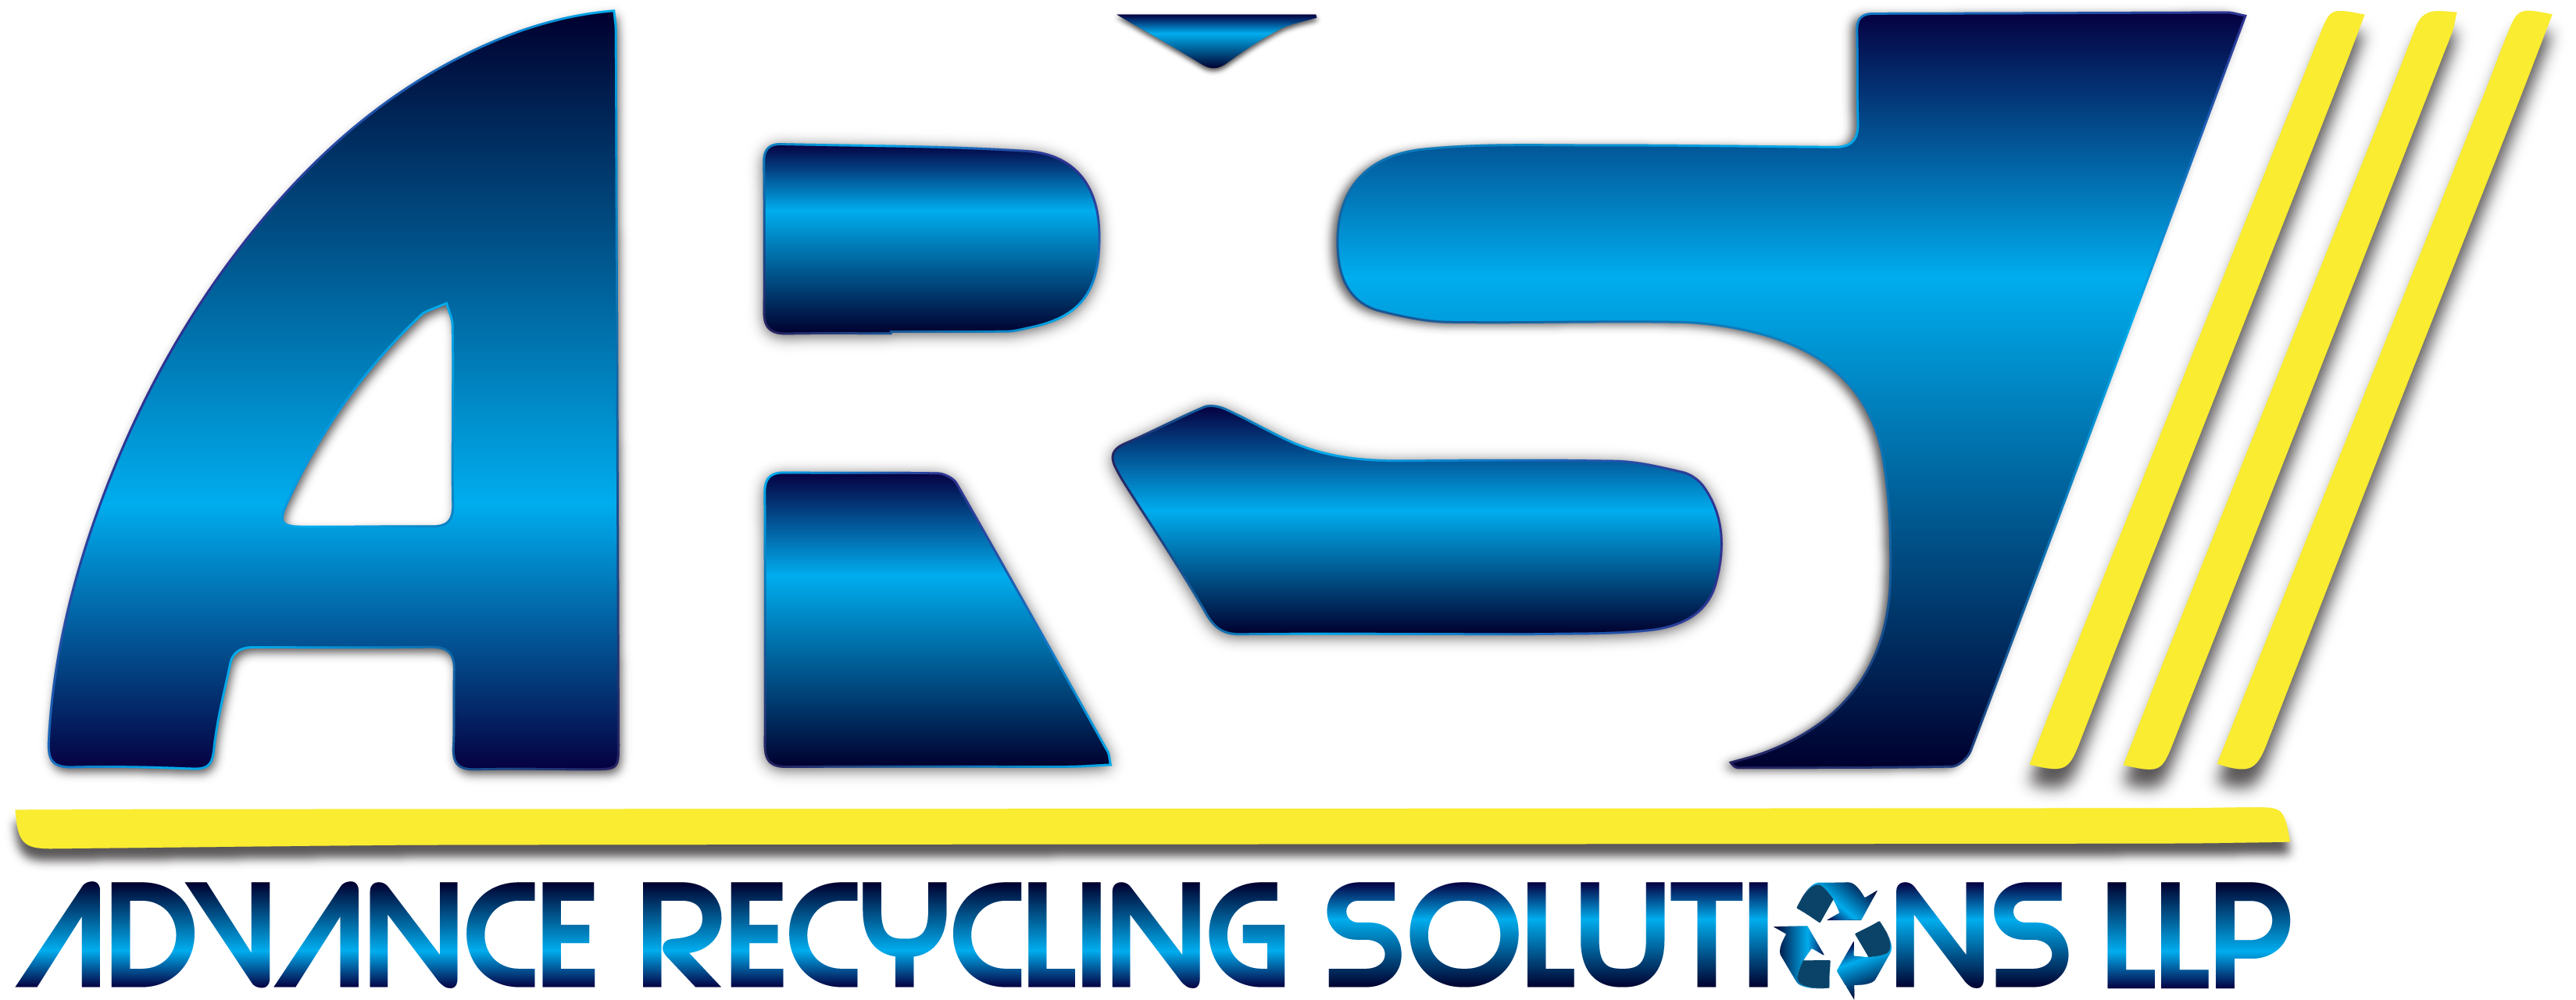 Advance Recycling Solutions